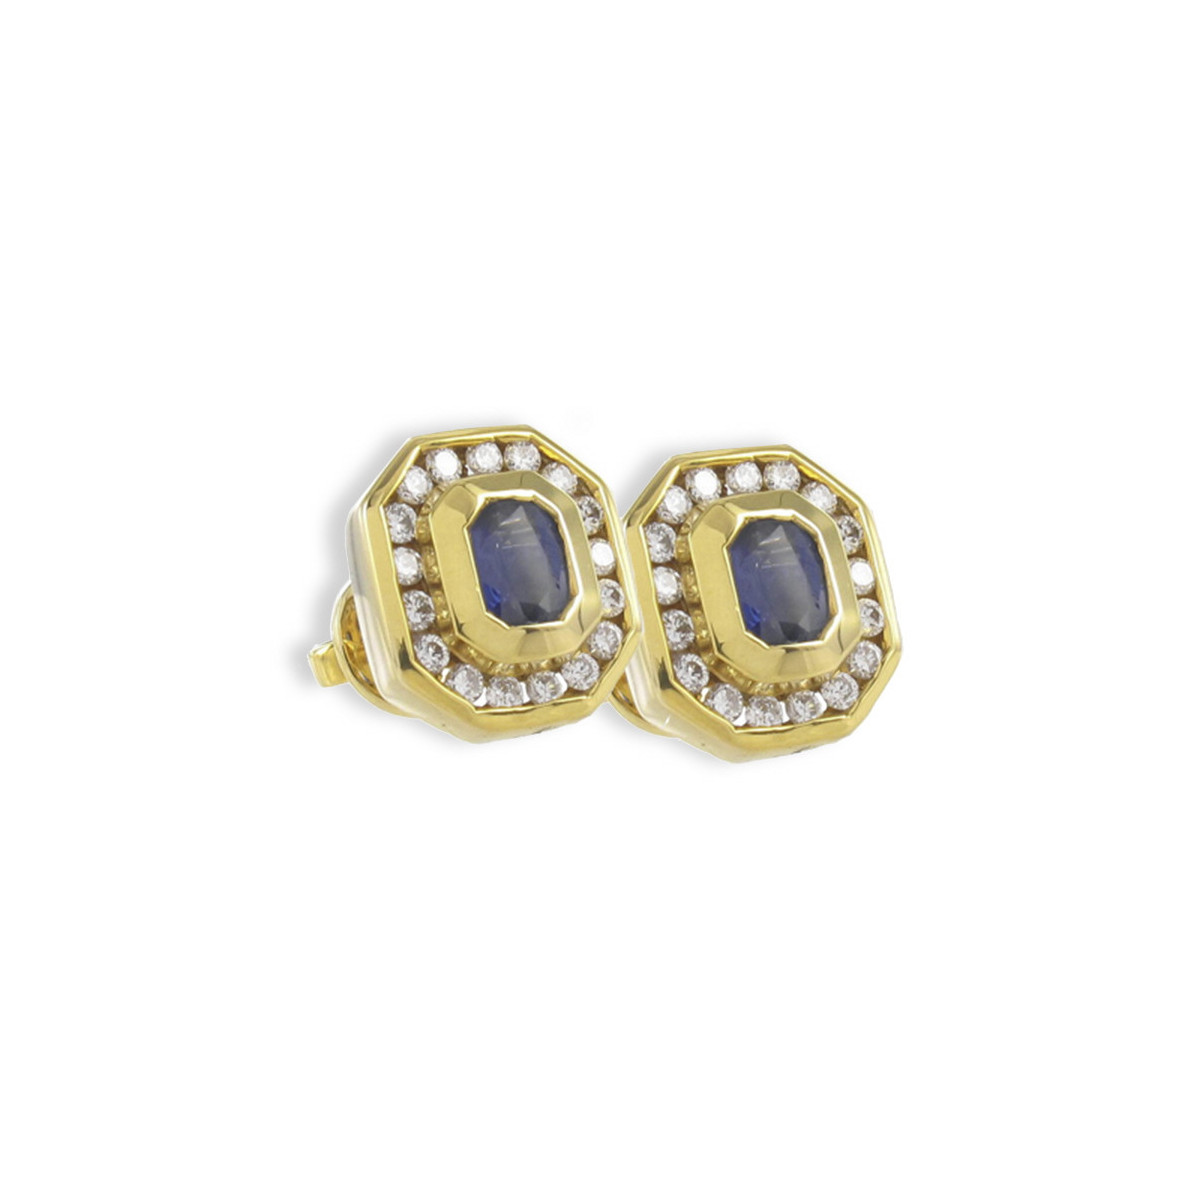 GOLD SAPPHIRE AND DIAMOND EARRING